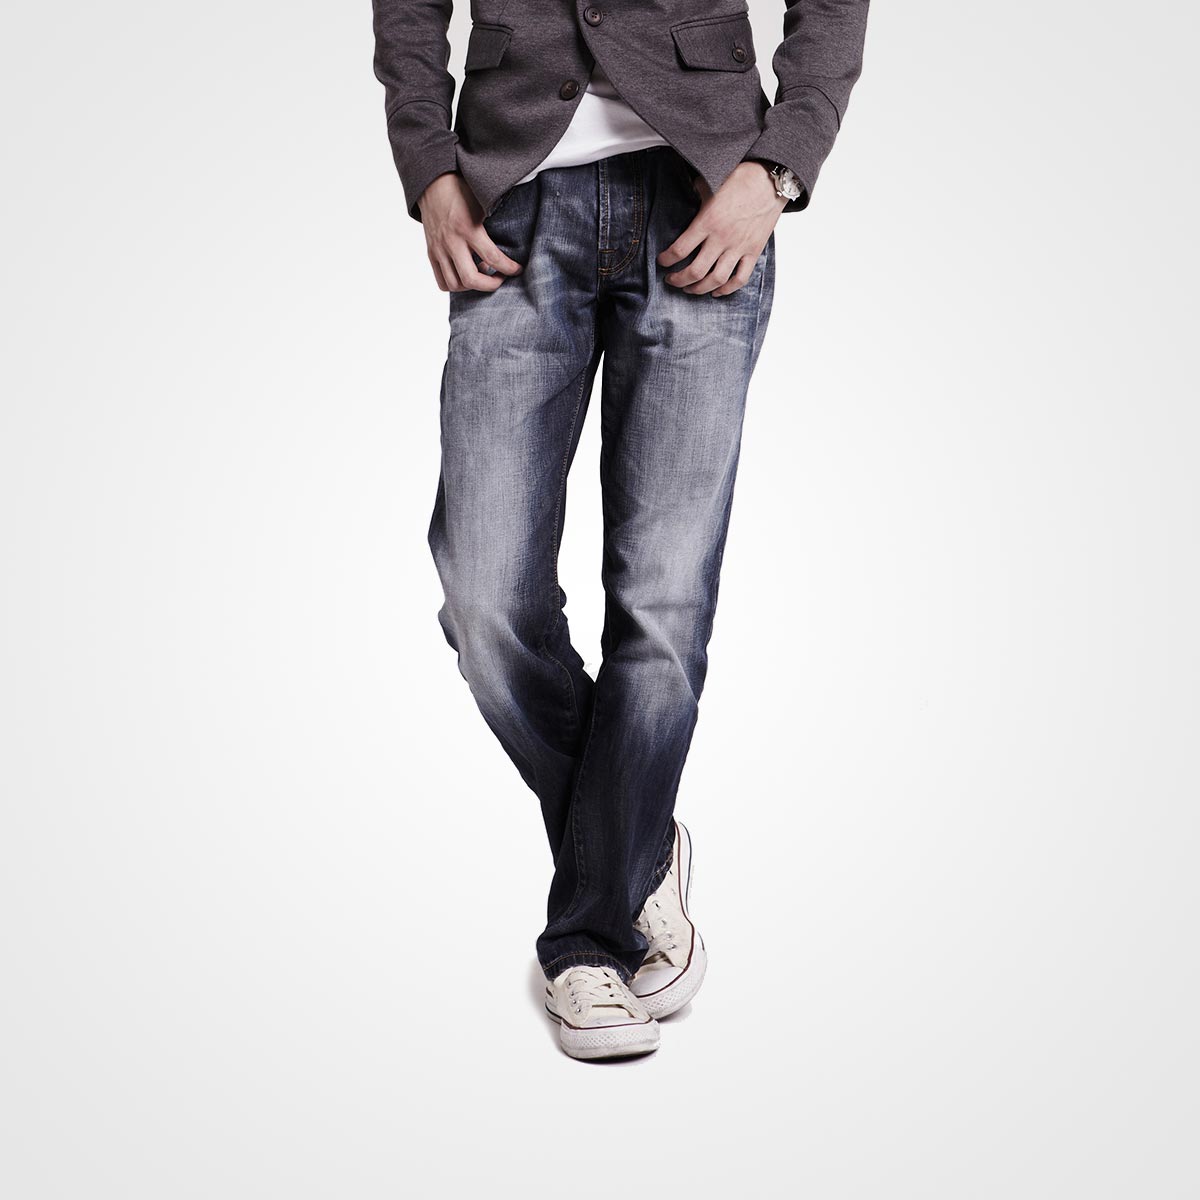 product-m-jeans1.jpg